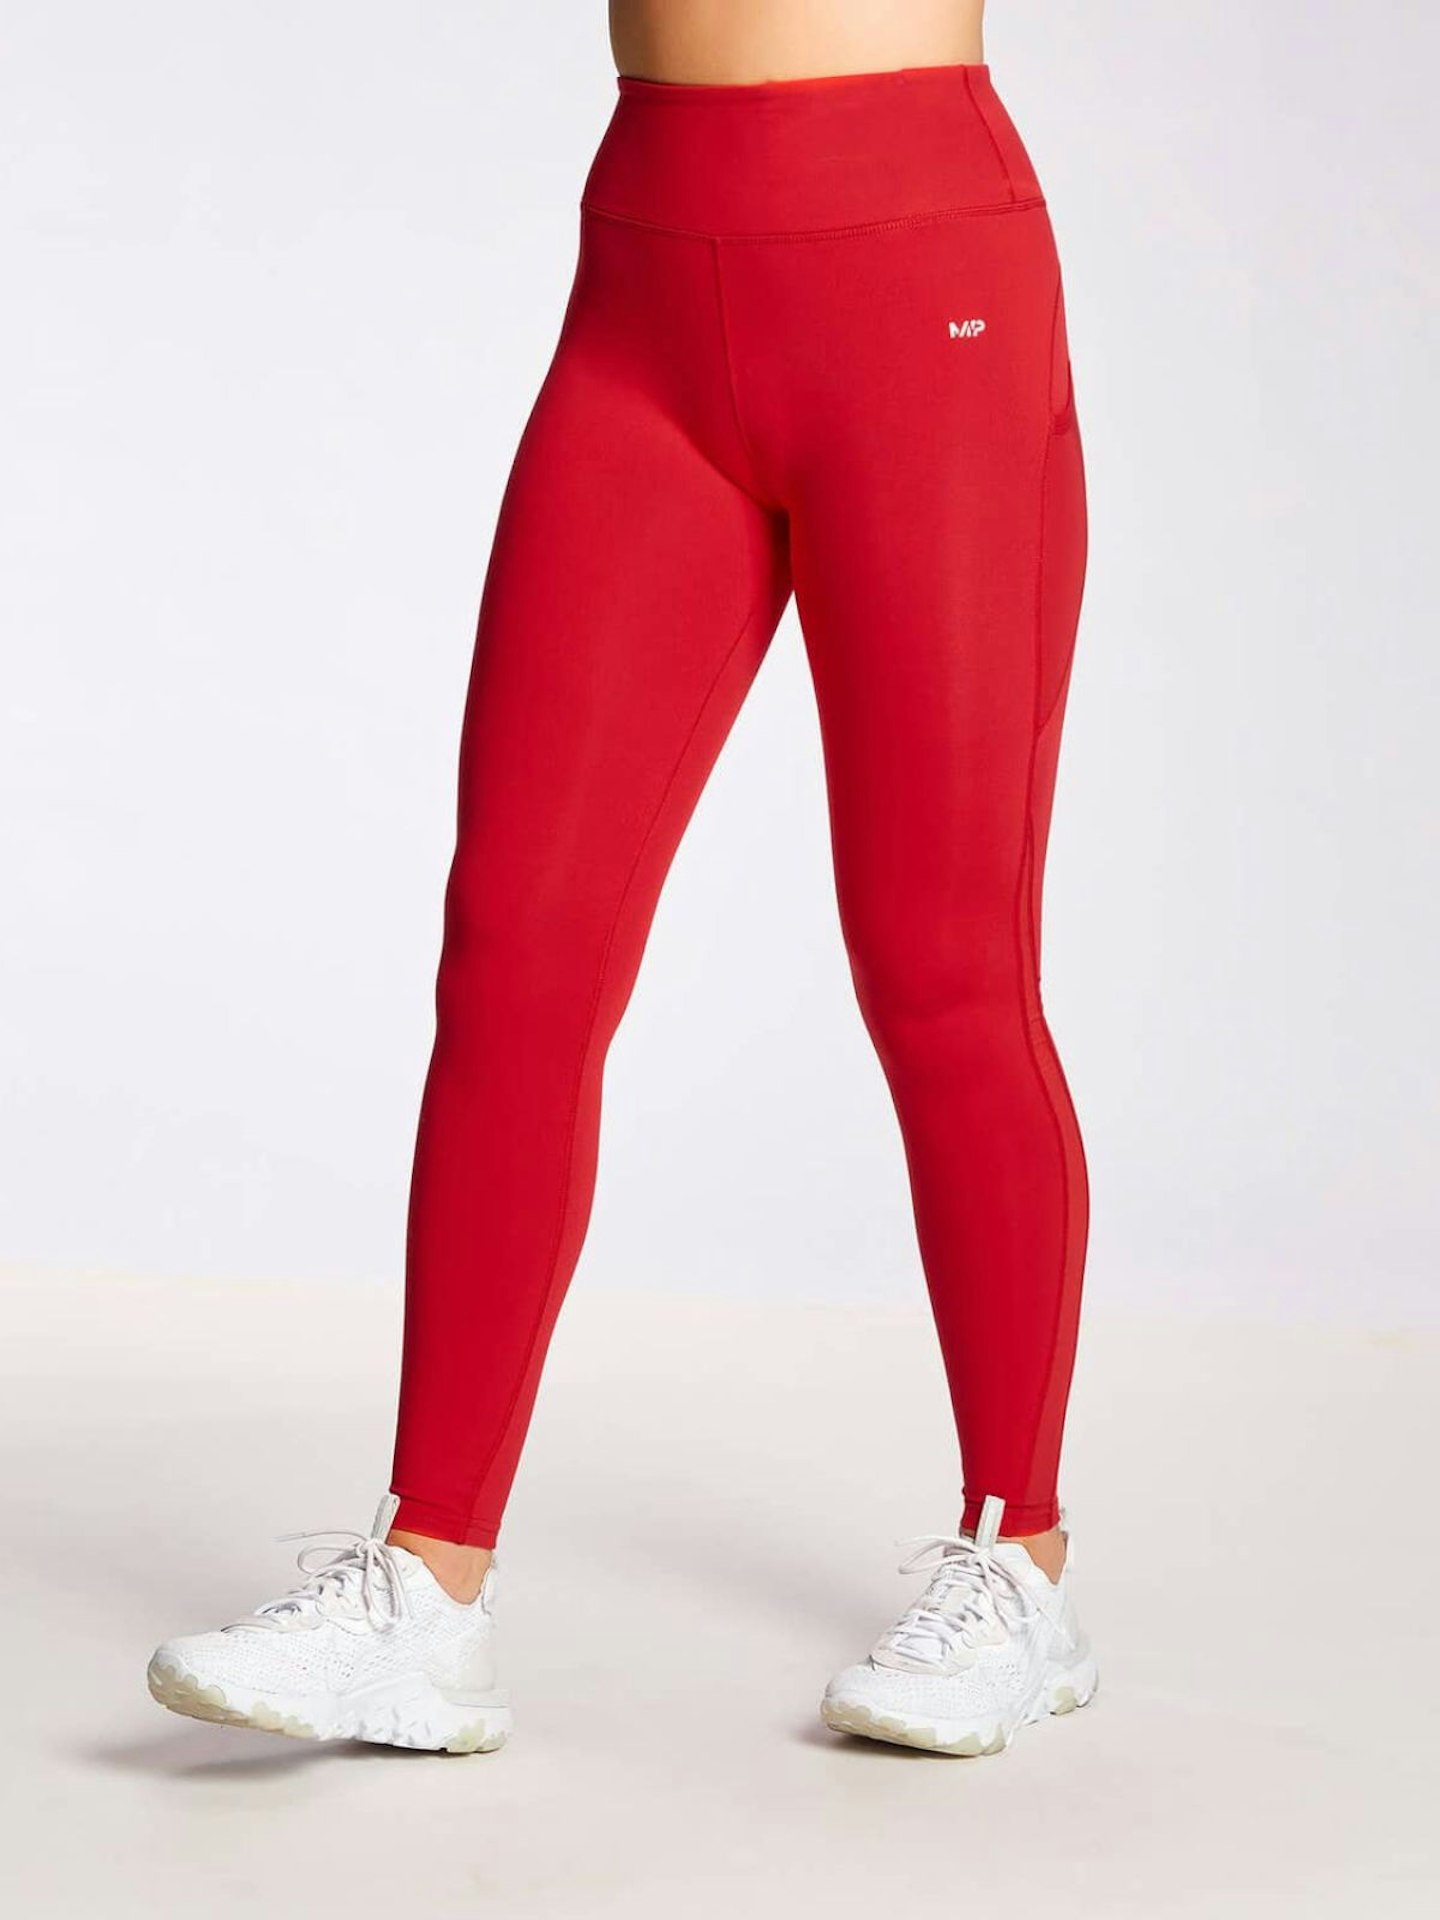 I Tested The Best Lululemon Look Alikes on : Here Are My Favorites   Womens workout outfits, Womens athletic outfits, Best lululemon leggings